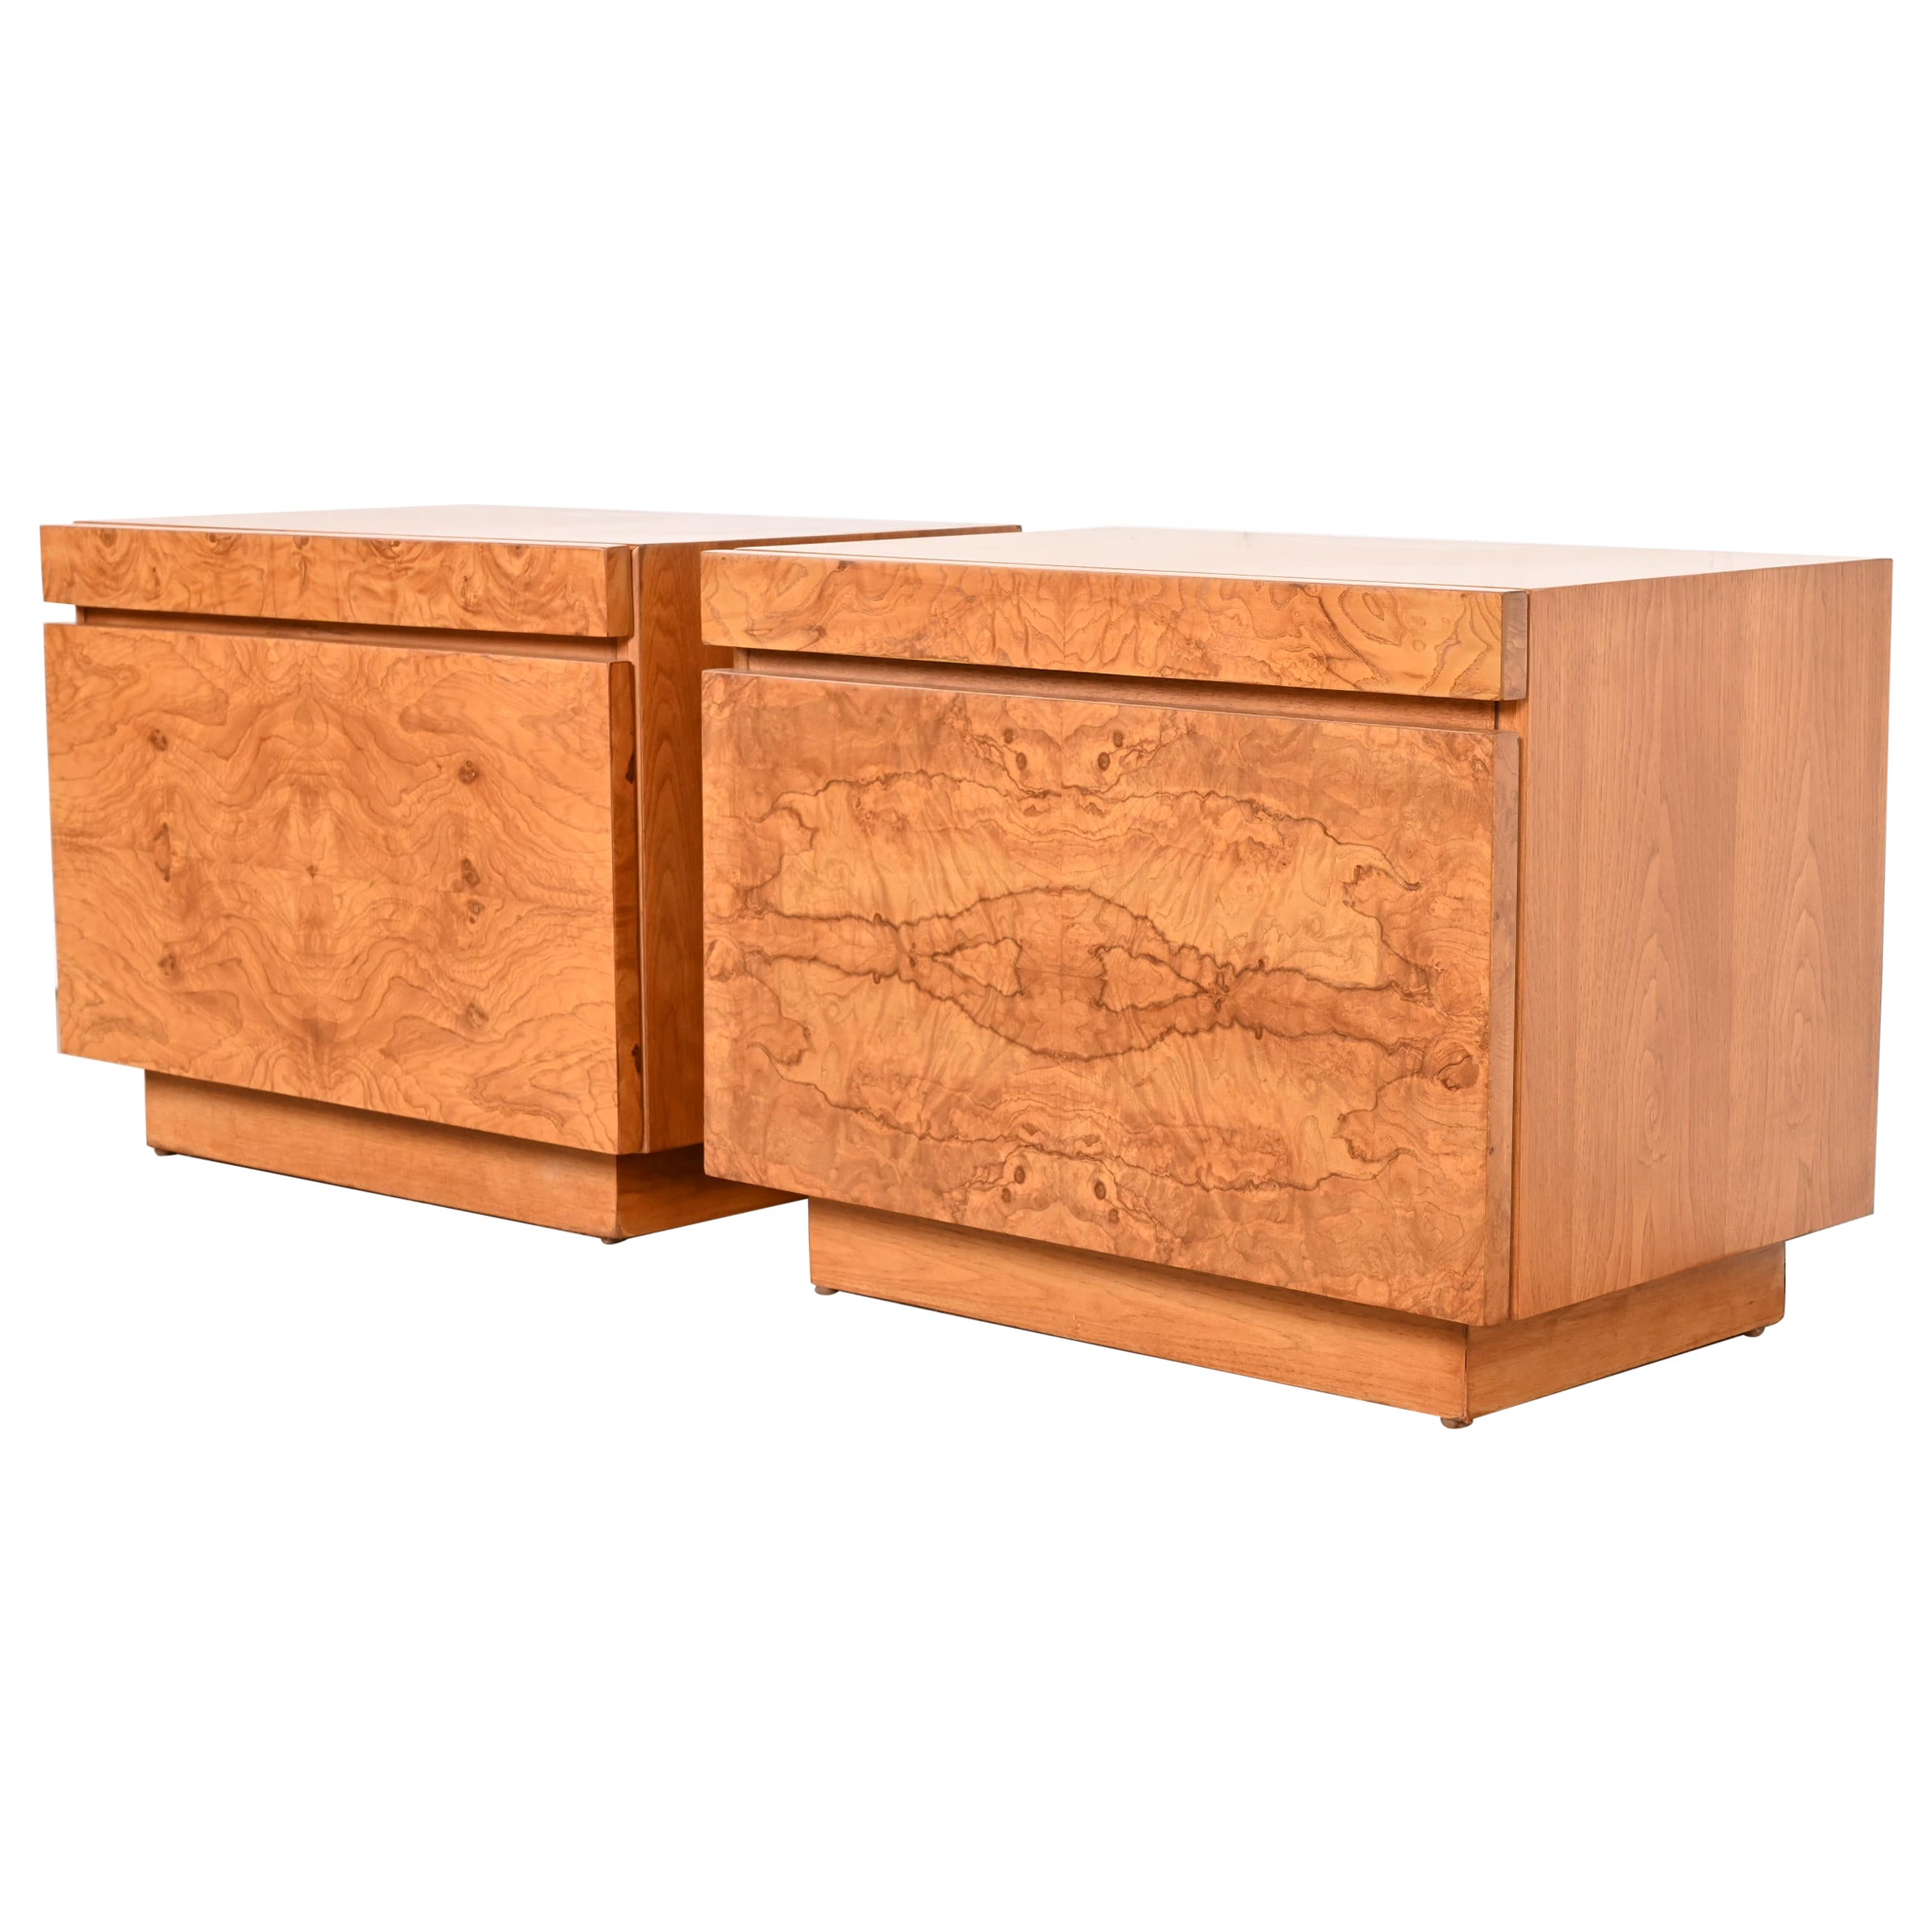 Milo Baughman Style Burl Wood Nightstands by Lane, Pair For Sale